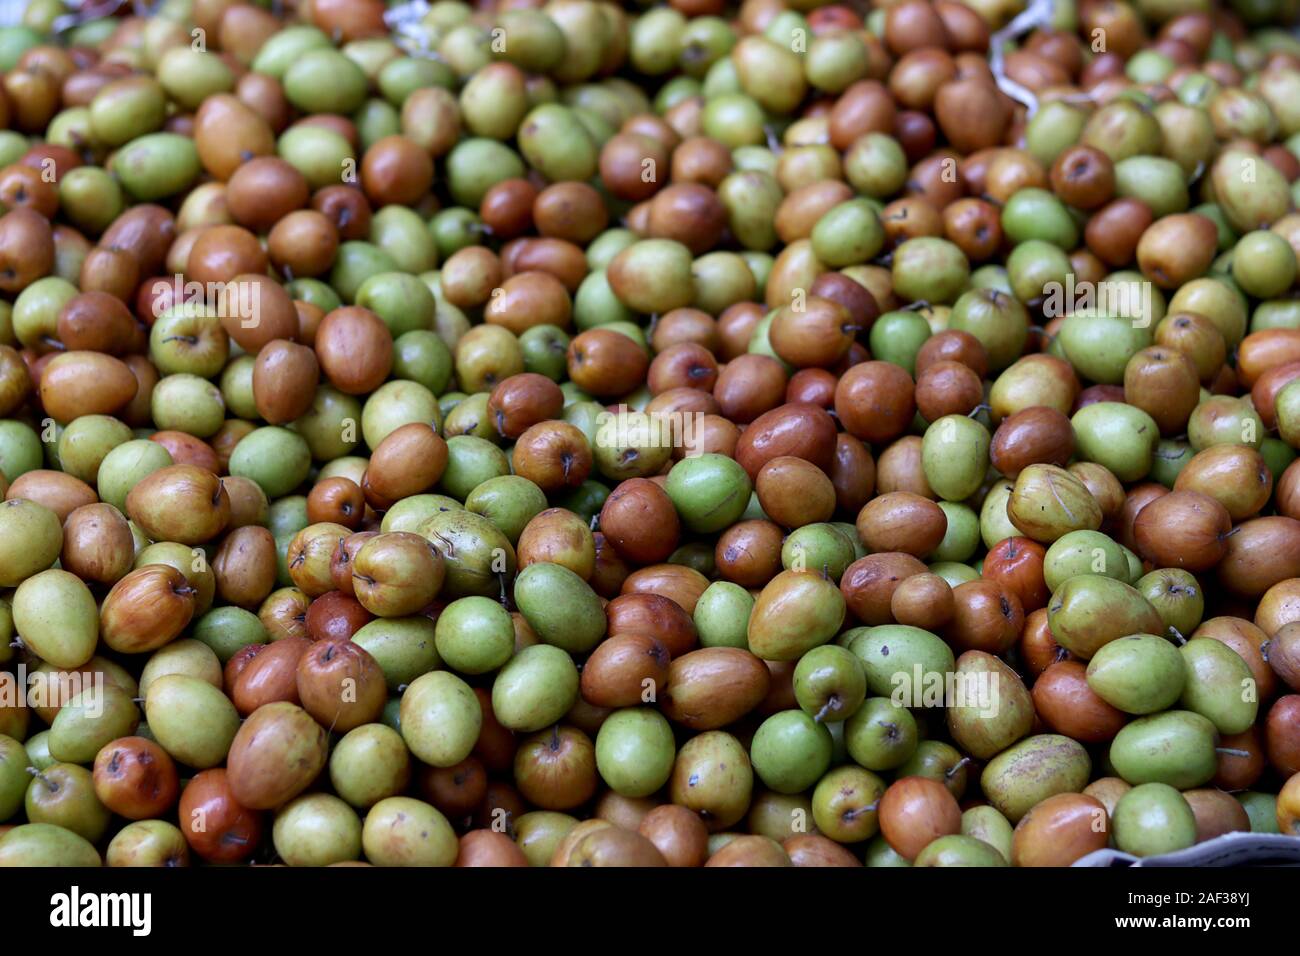 India Jujube Fruit For Sale In Market Stock Photo Alamy